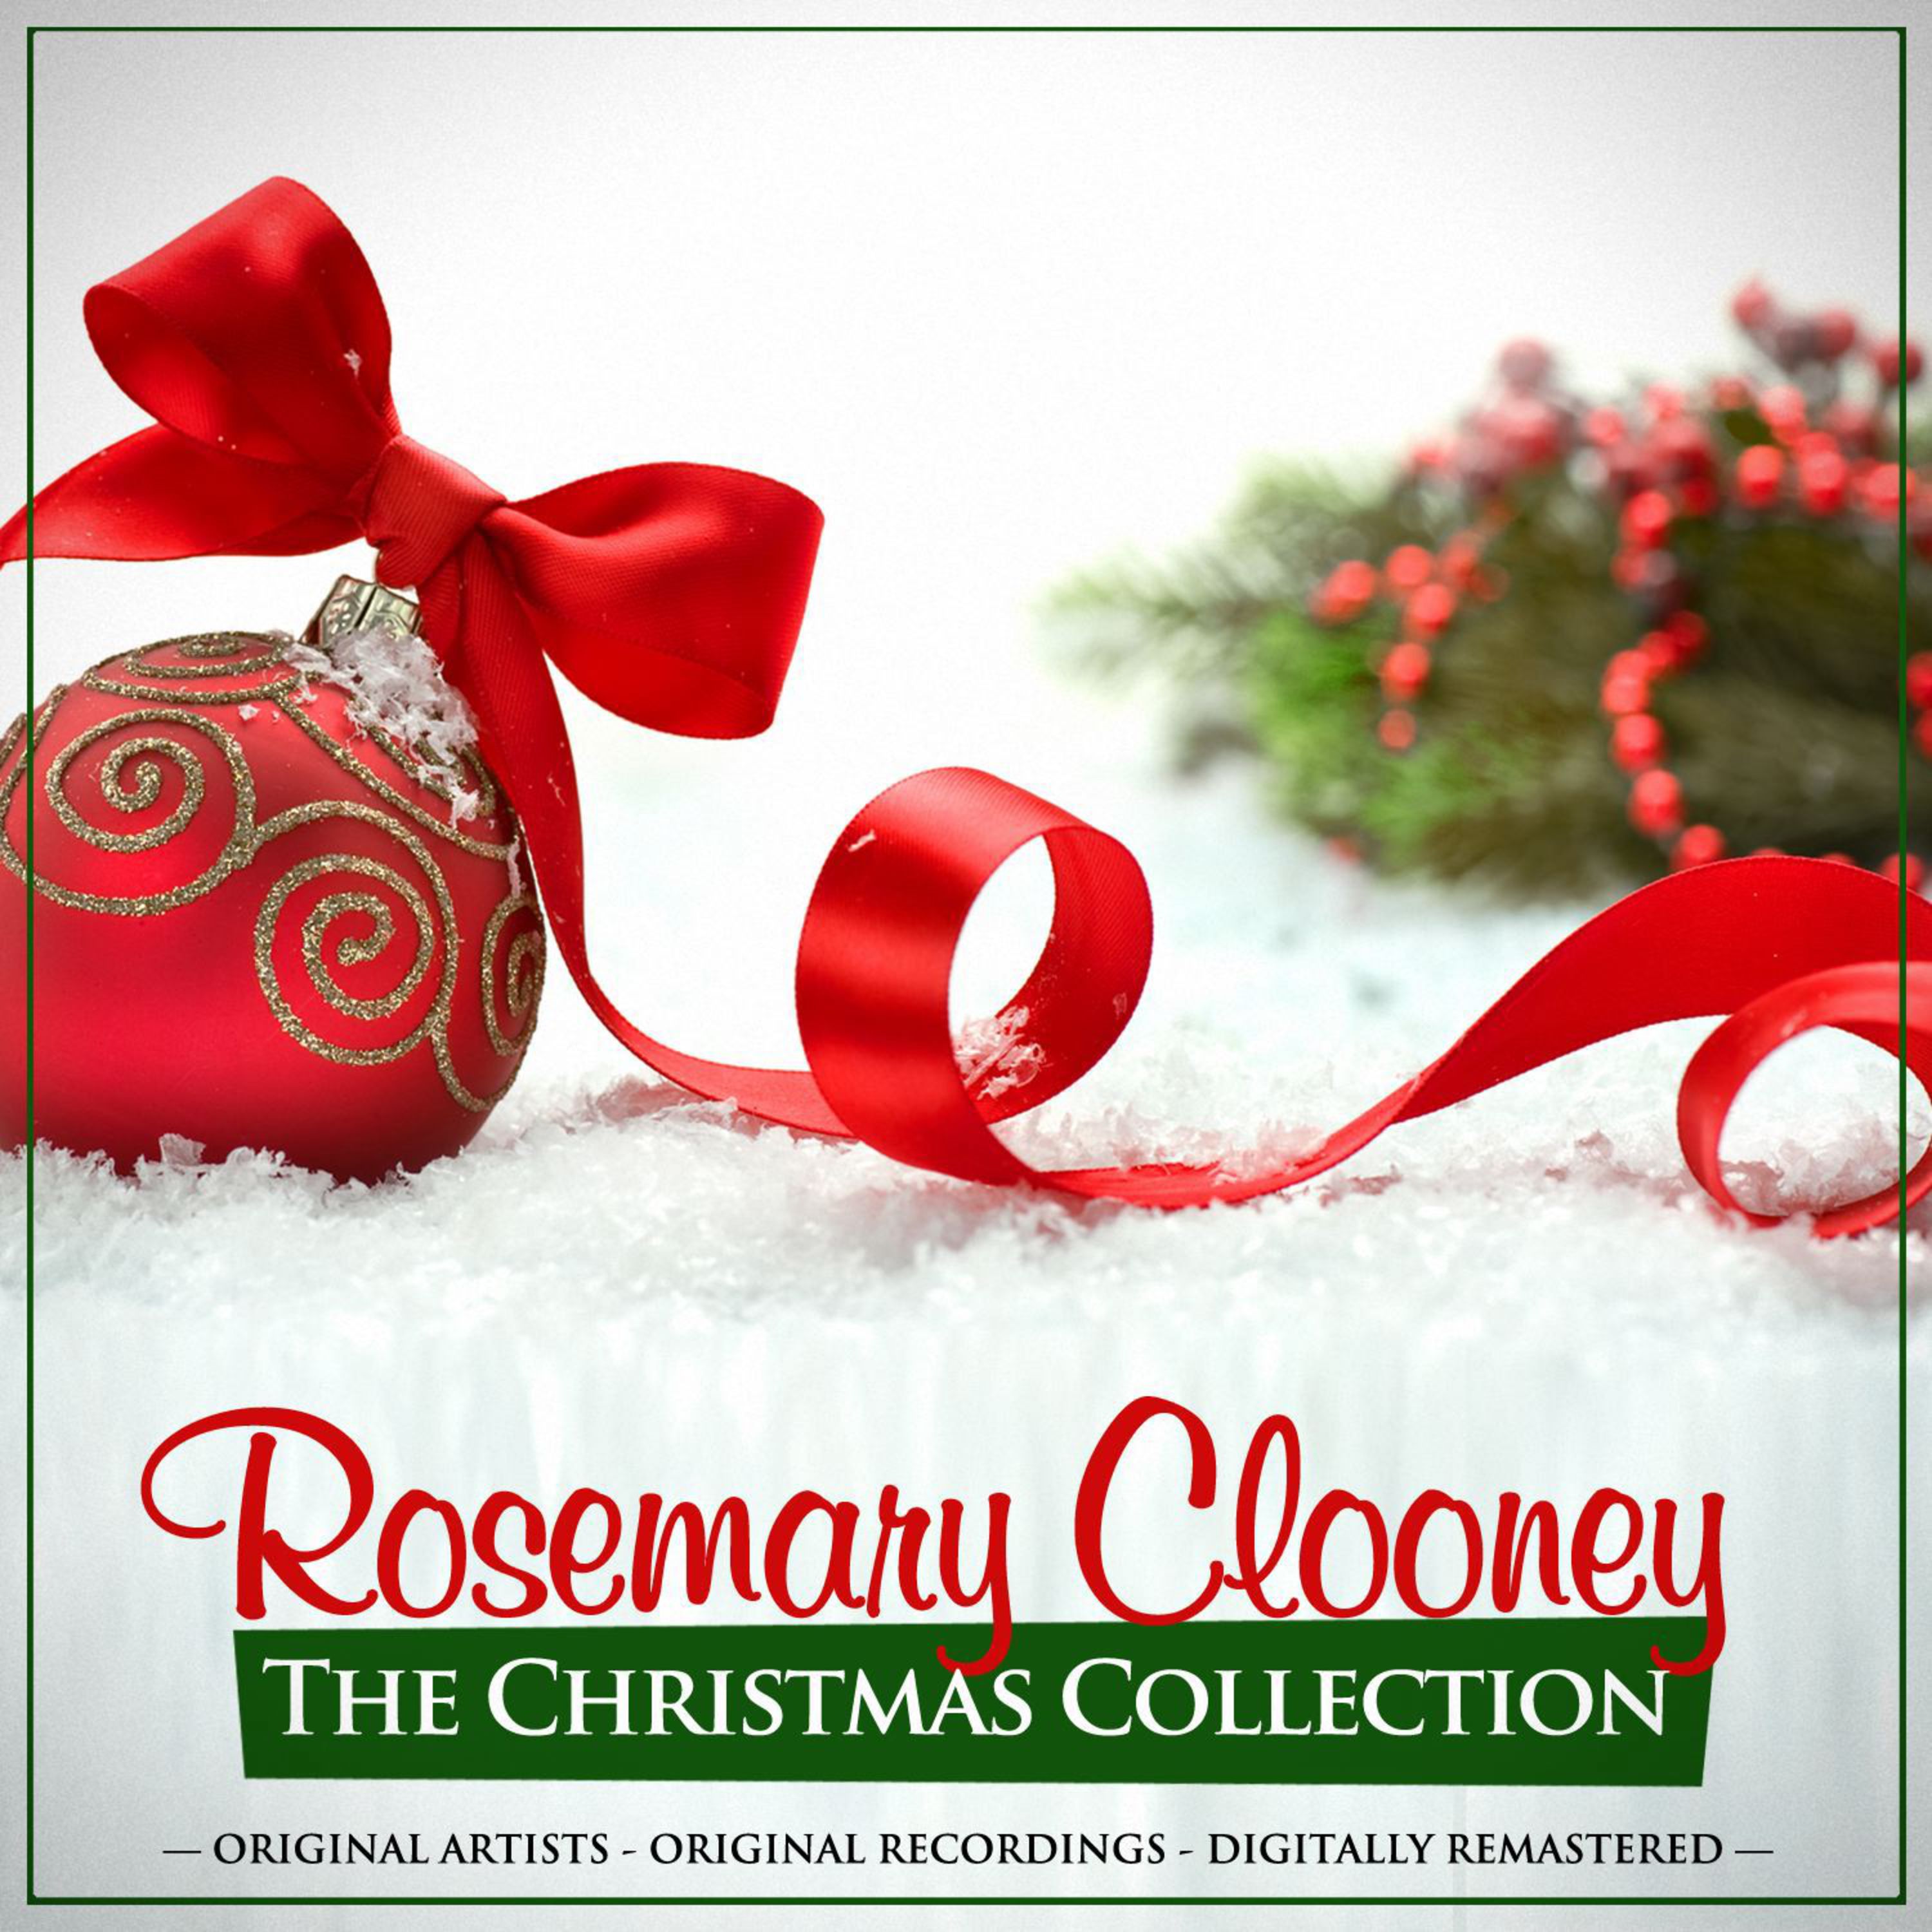 The Christmas Collection: Rosemary Clooney (Remastered)